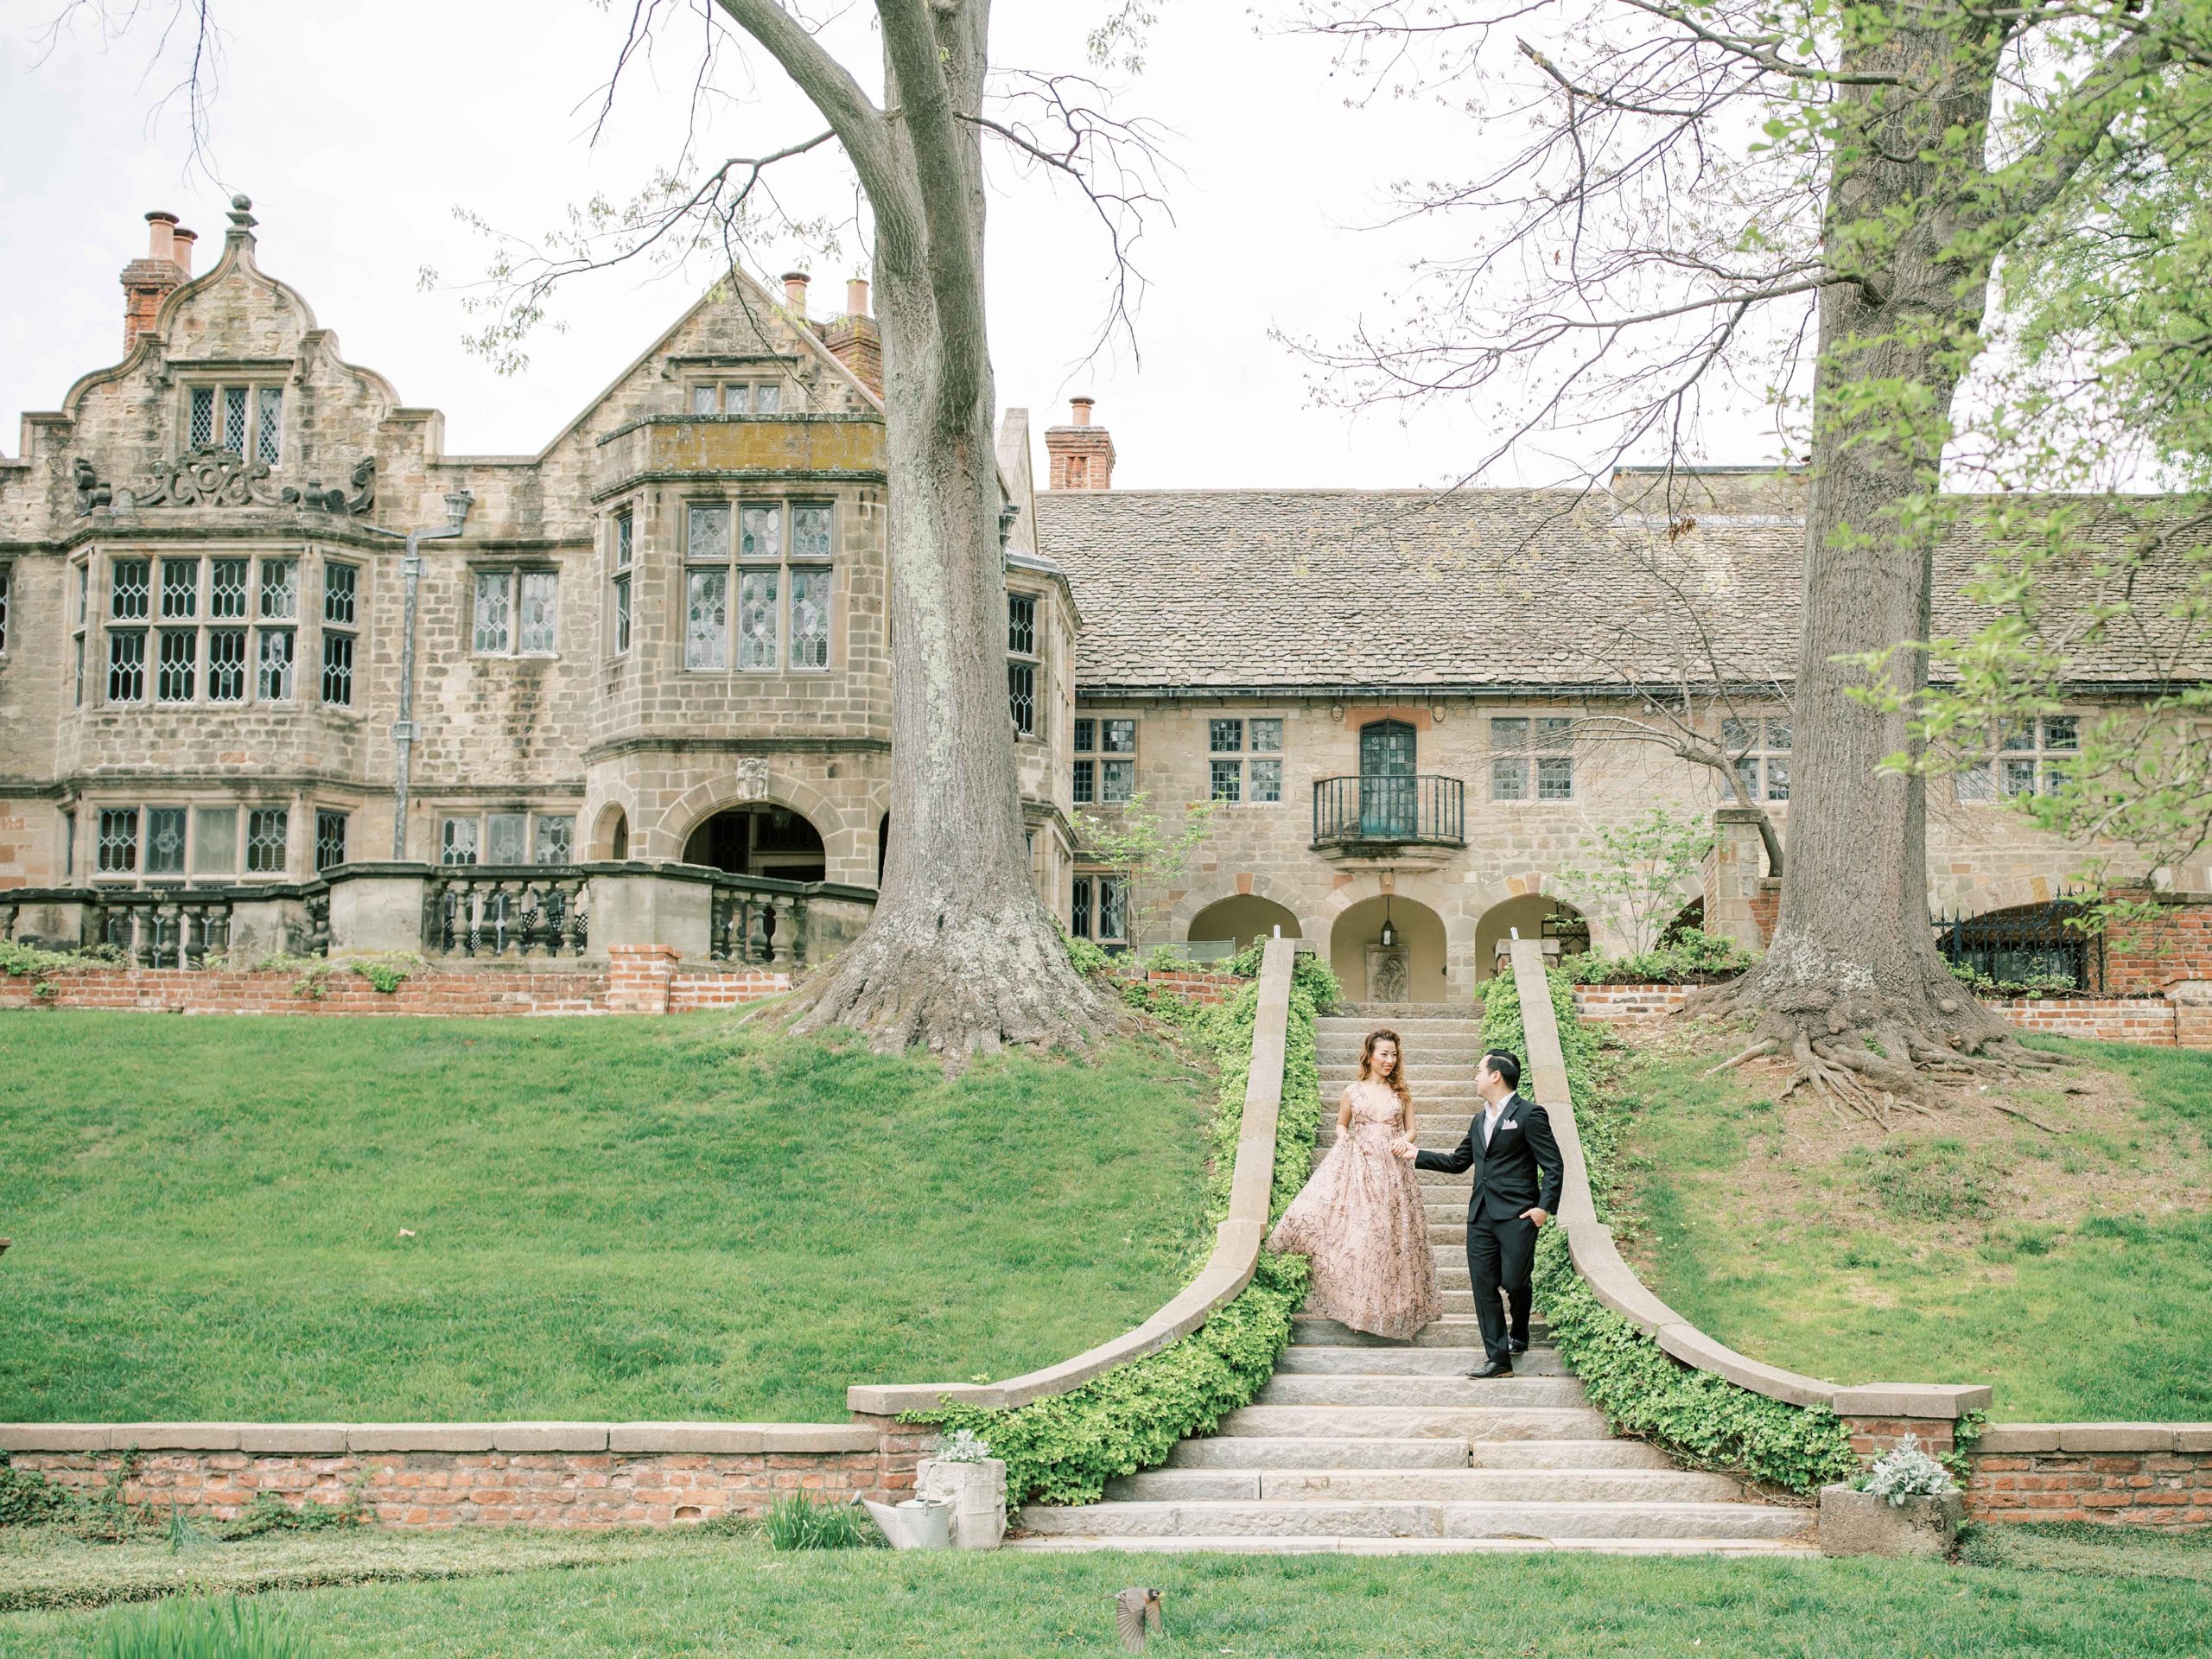 A stylish and romantic engagement session shot on film at the historic Virginia House located in Richmond, VA.